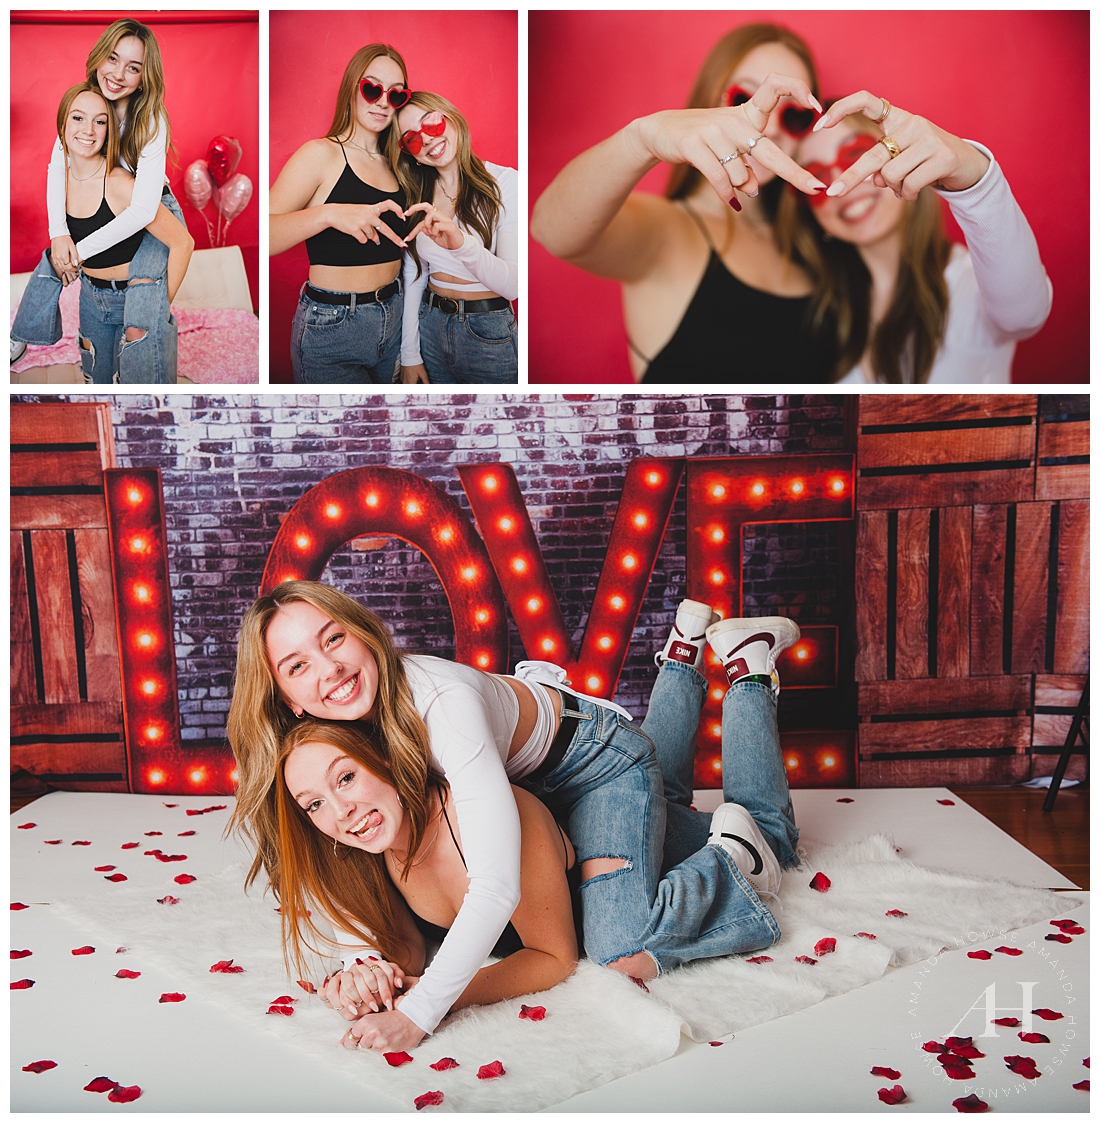 Cute Friends V-Day Photoshoot | Fun Ideas For Friends on V-Day, Nikes and Cute Tanks | Photographed by the Best Tacoma Senior Portrait Photographer Amanda Howse Photography